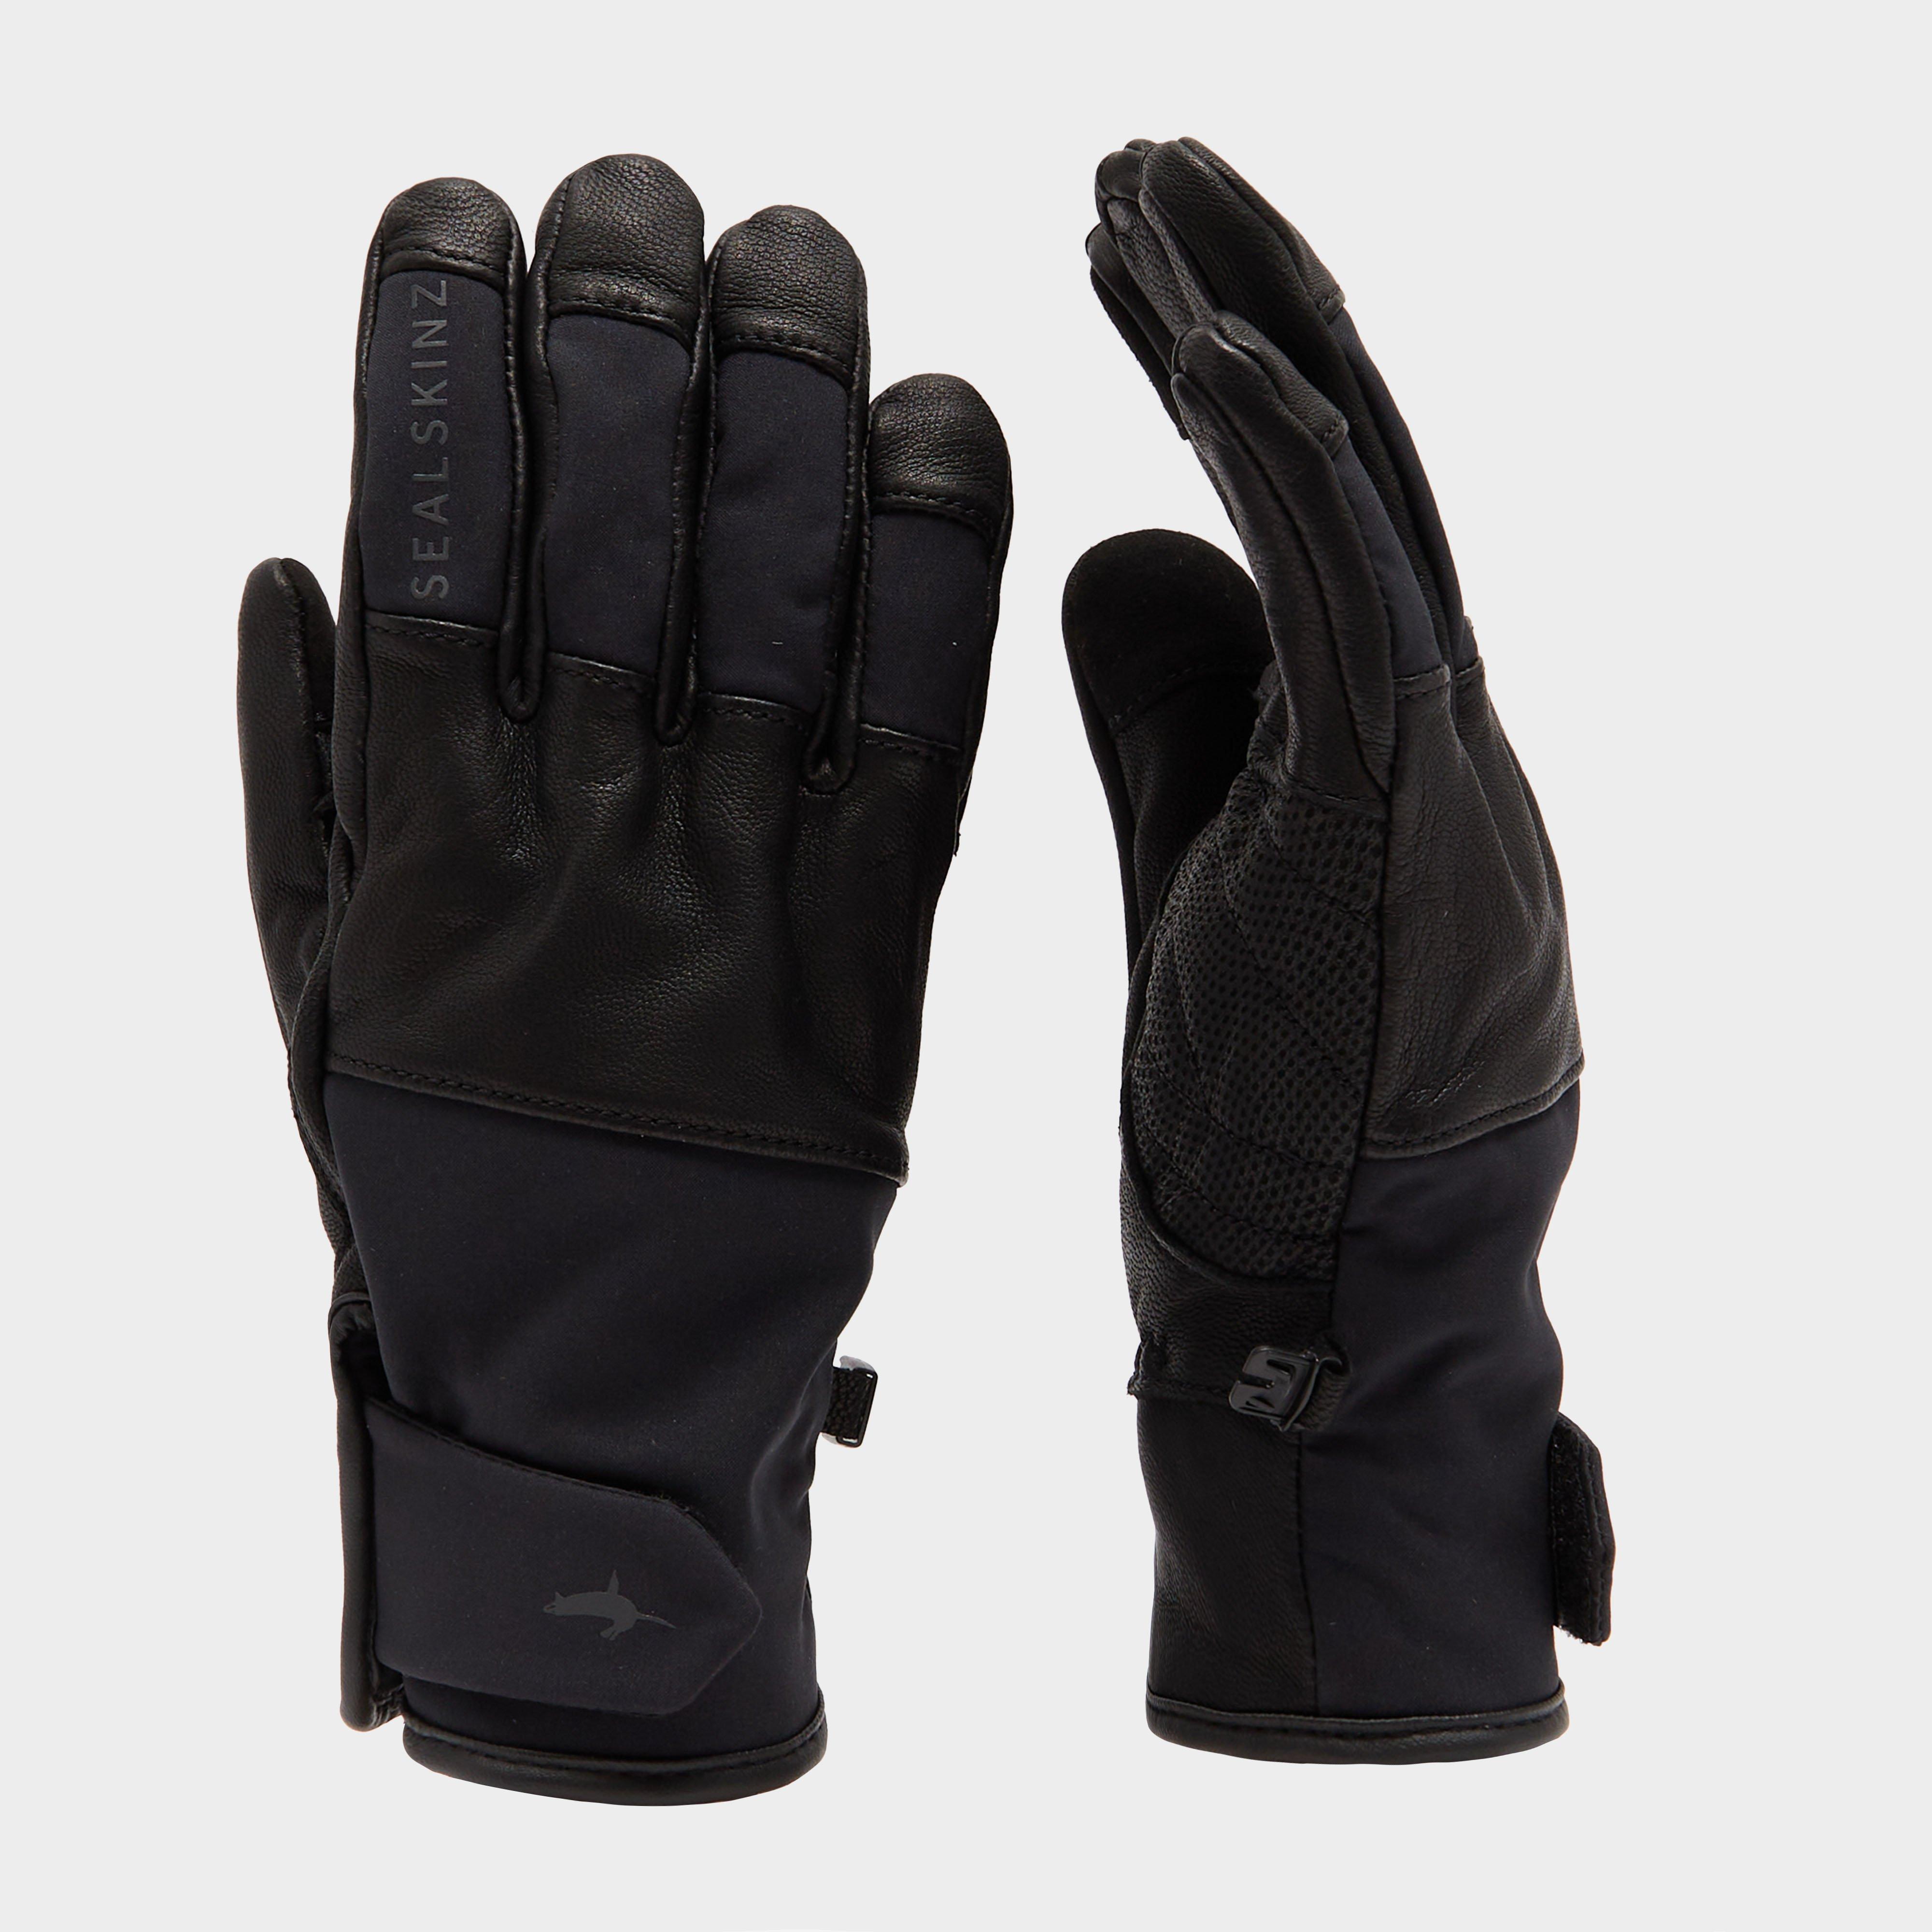  Sealskinz Waterproof Cold Weather Glove with Fusion Control, Black